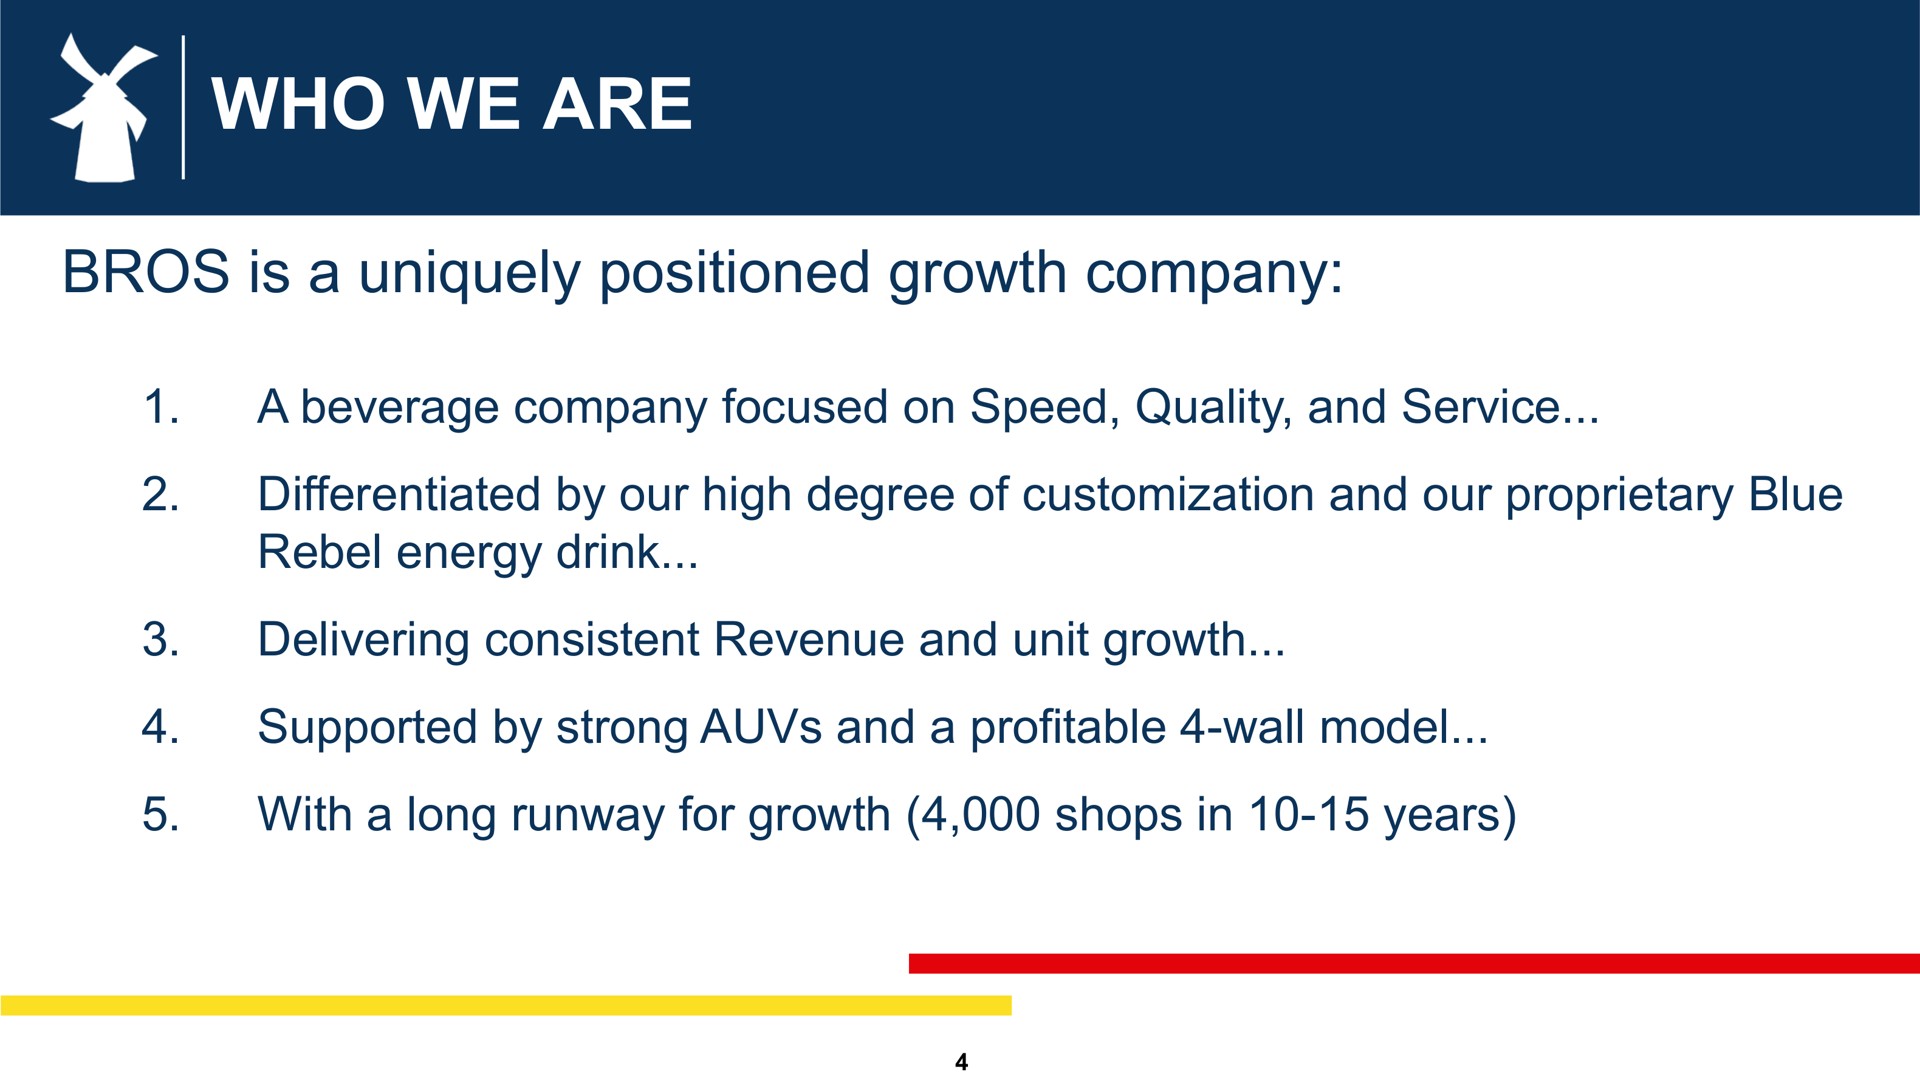 who we are is a uniquely positioned growth company a beverage company focused on speed quality and service differentiated by our high degree of and our proprietary blue rebel energy drink delivering consistent revenue and unit growth supported by strong and a profitable wall model with a long runway for growth shops in years | Dutch Bros